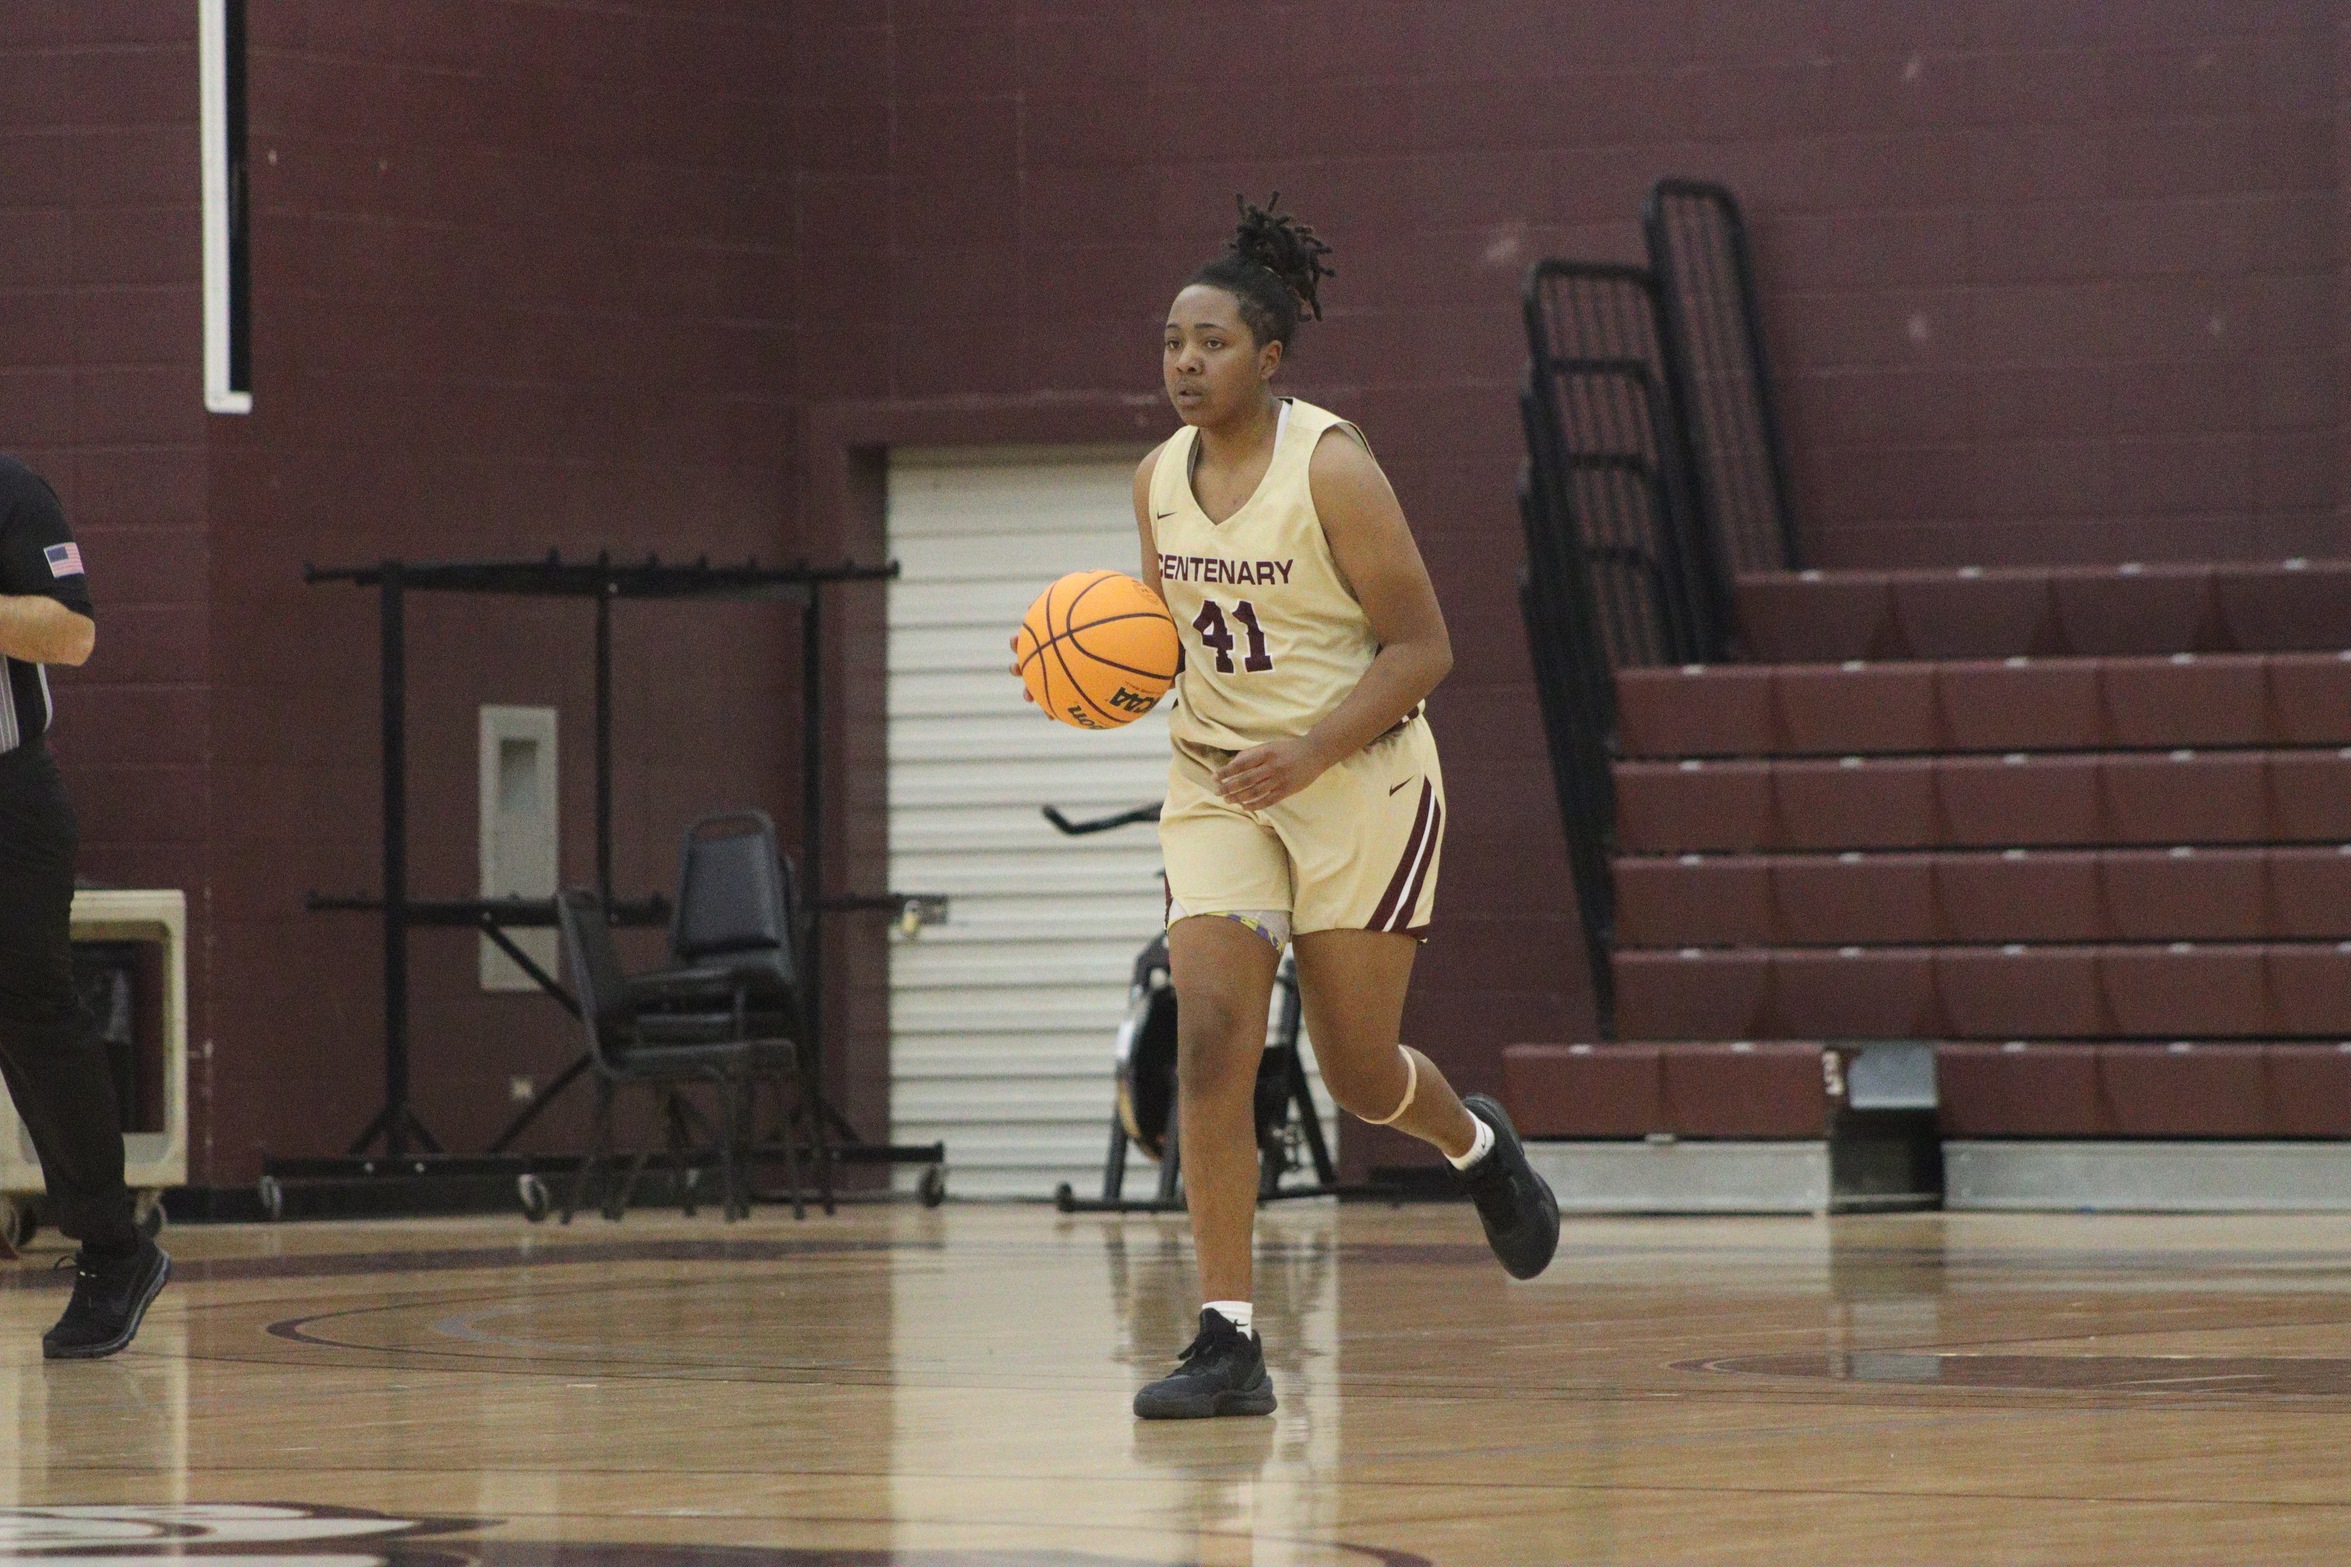 Dymon Drumgo helped lead the Ladies to a big SCAC win on Friday evening at home.